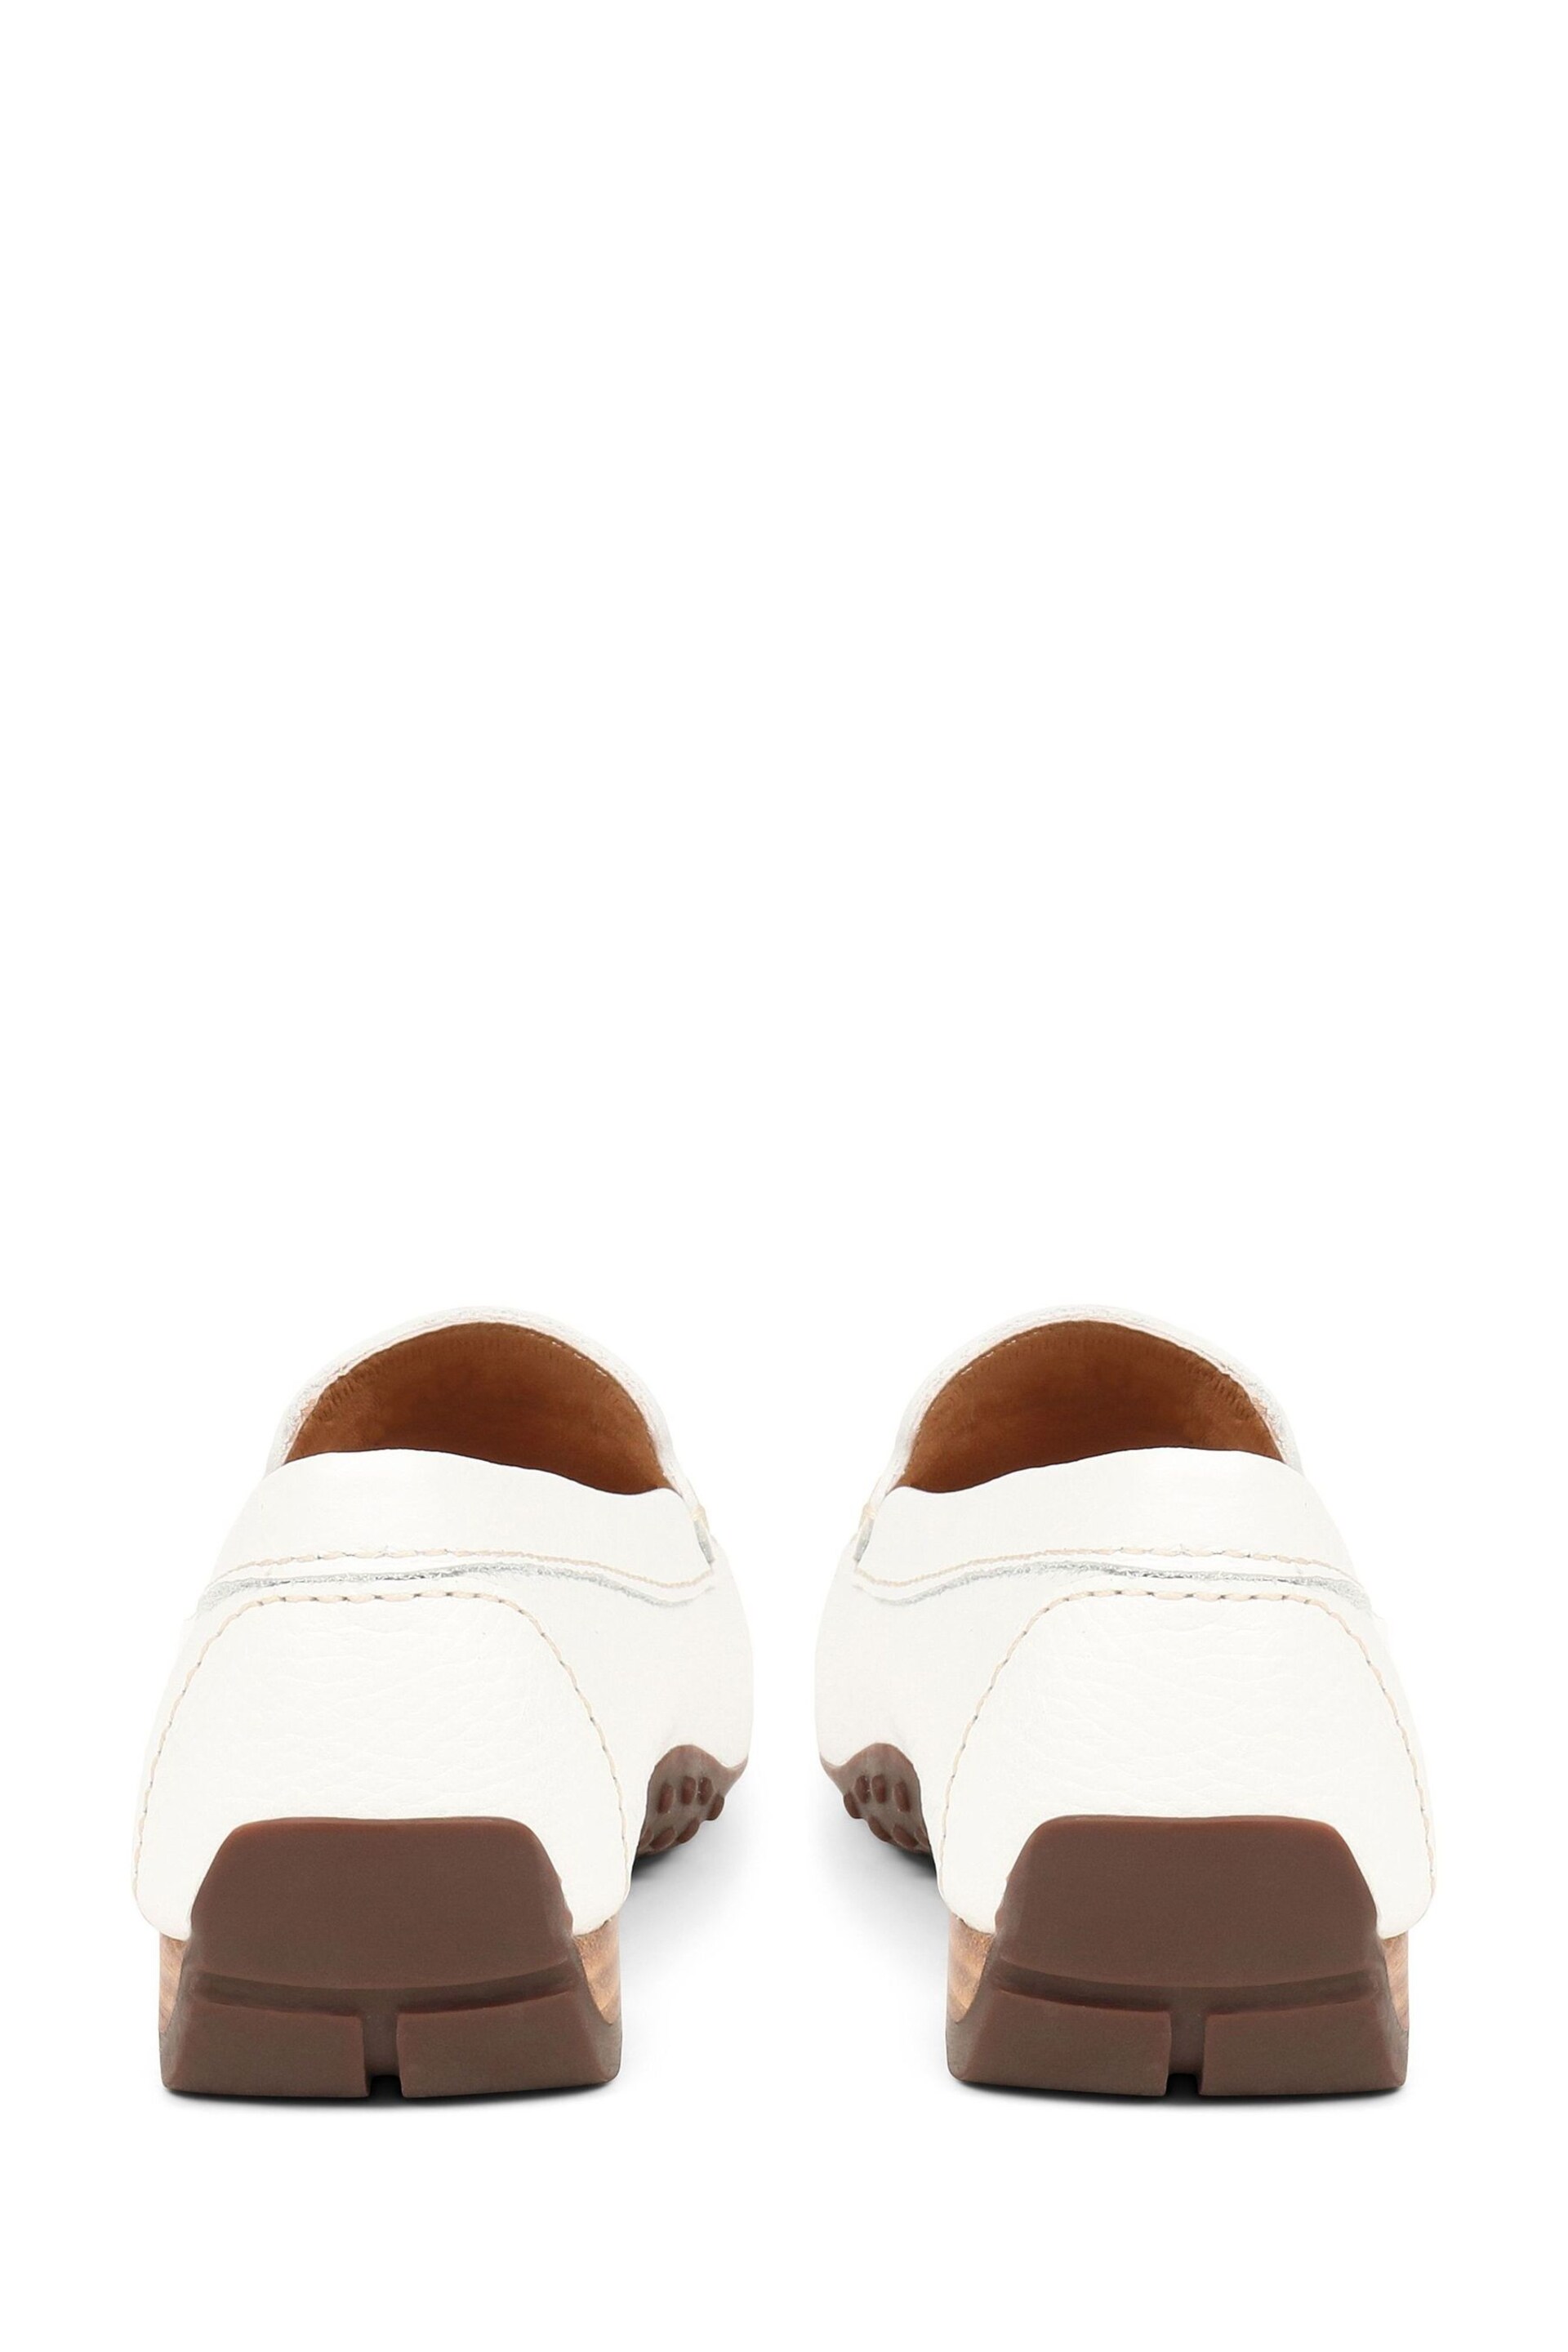 Van Dal Casual Leather Moccasins - Image 3 of 5